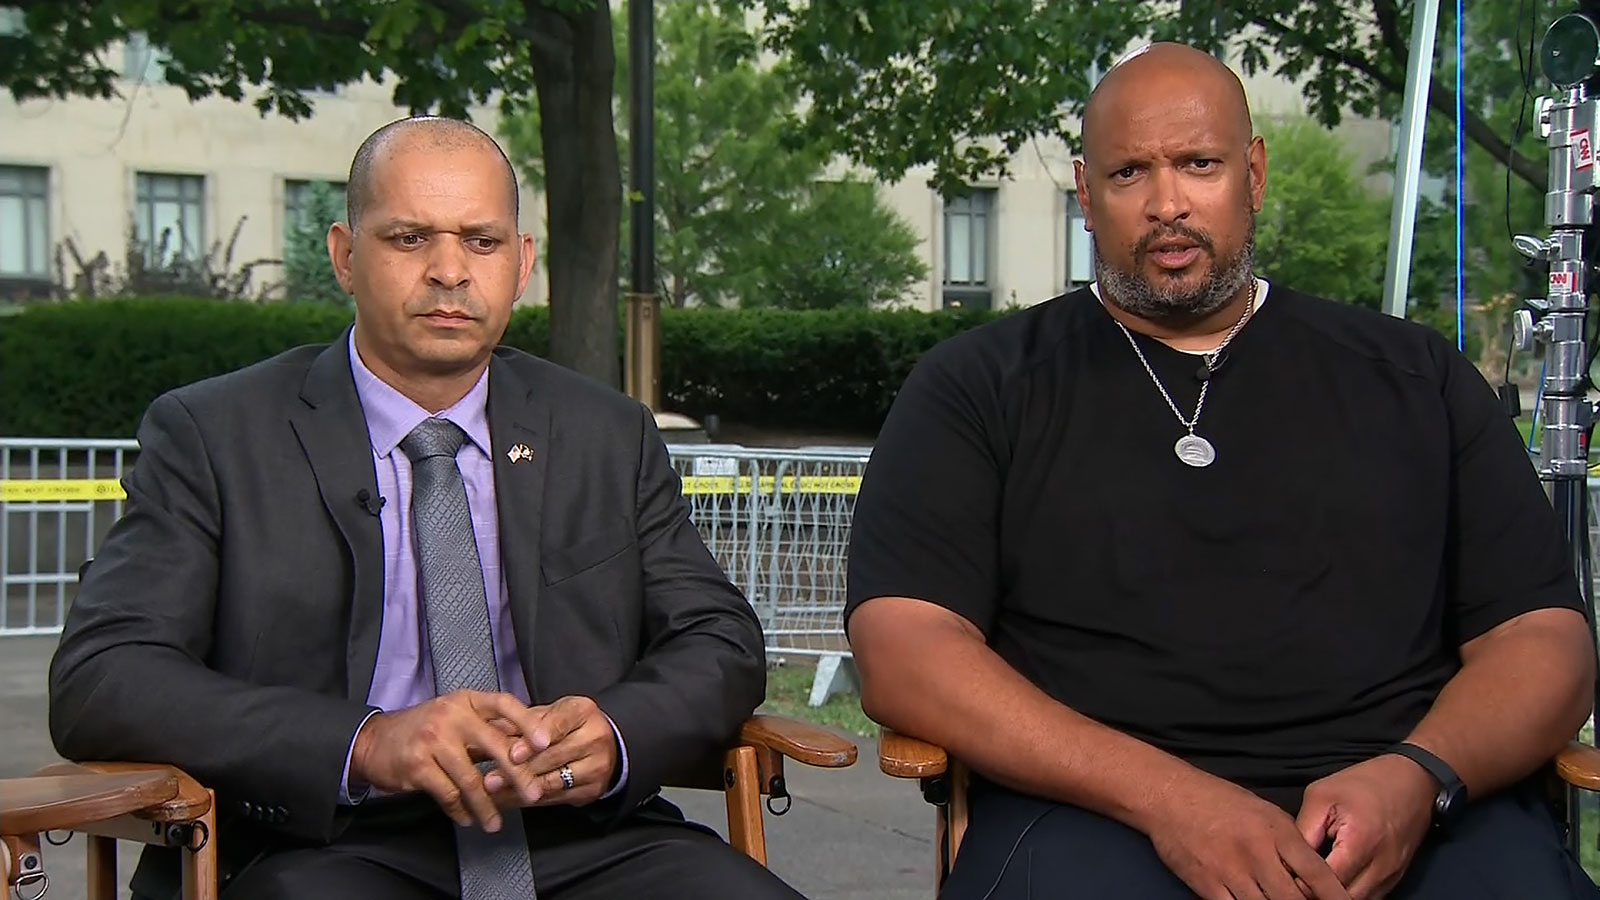 Former US Capitol Police Sgt. Aquilino Gonell, left, and Capitol Police officer Harry Dunn appear on CNN following Donald Trump's arraignment on Thursday, August 3.